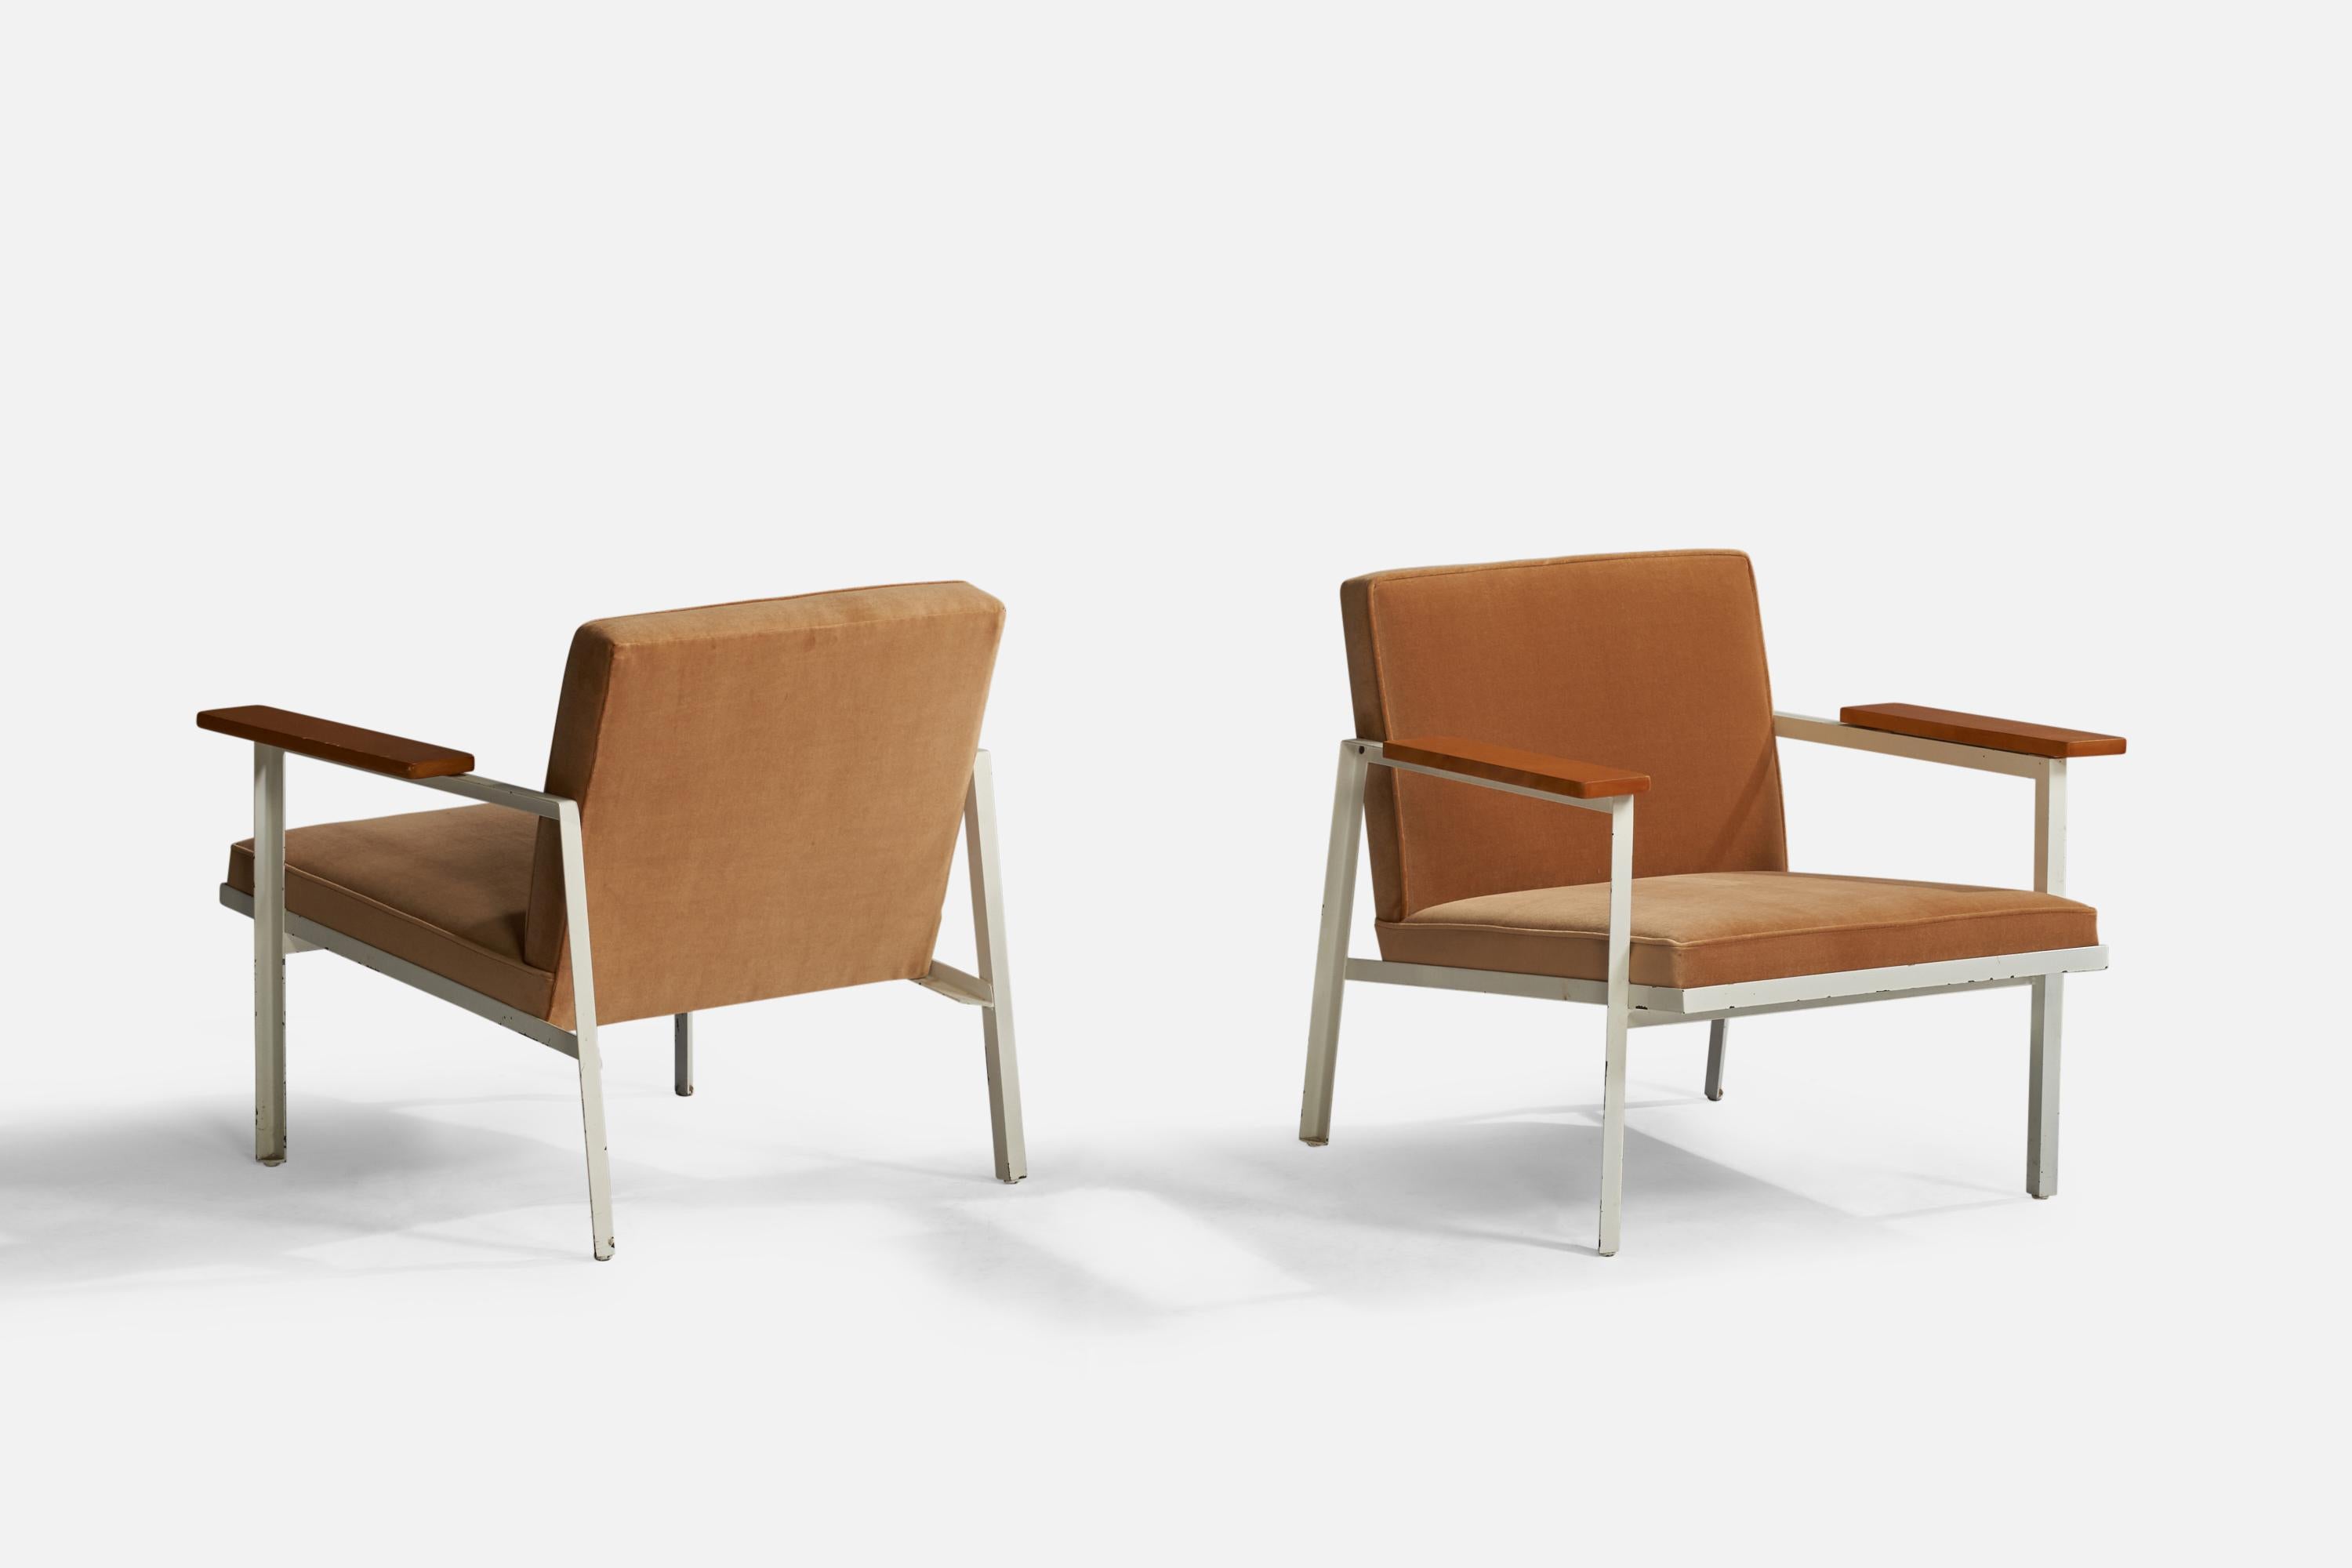 American George Nelson, Lounge Chairs, Wood, Steel, Velvet, USA, 1950s For Sale